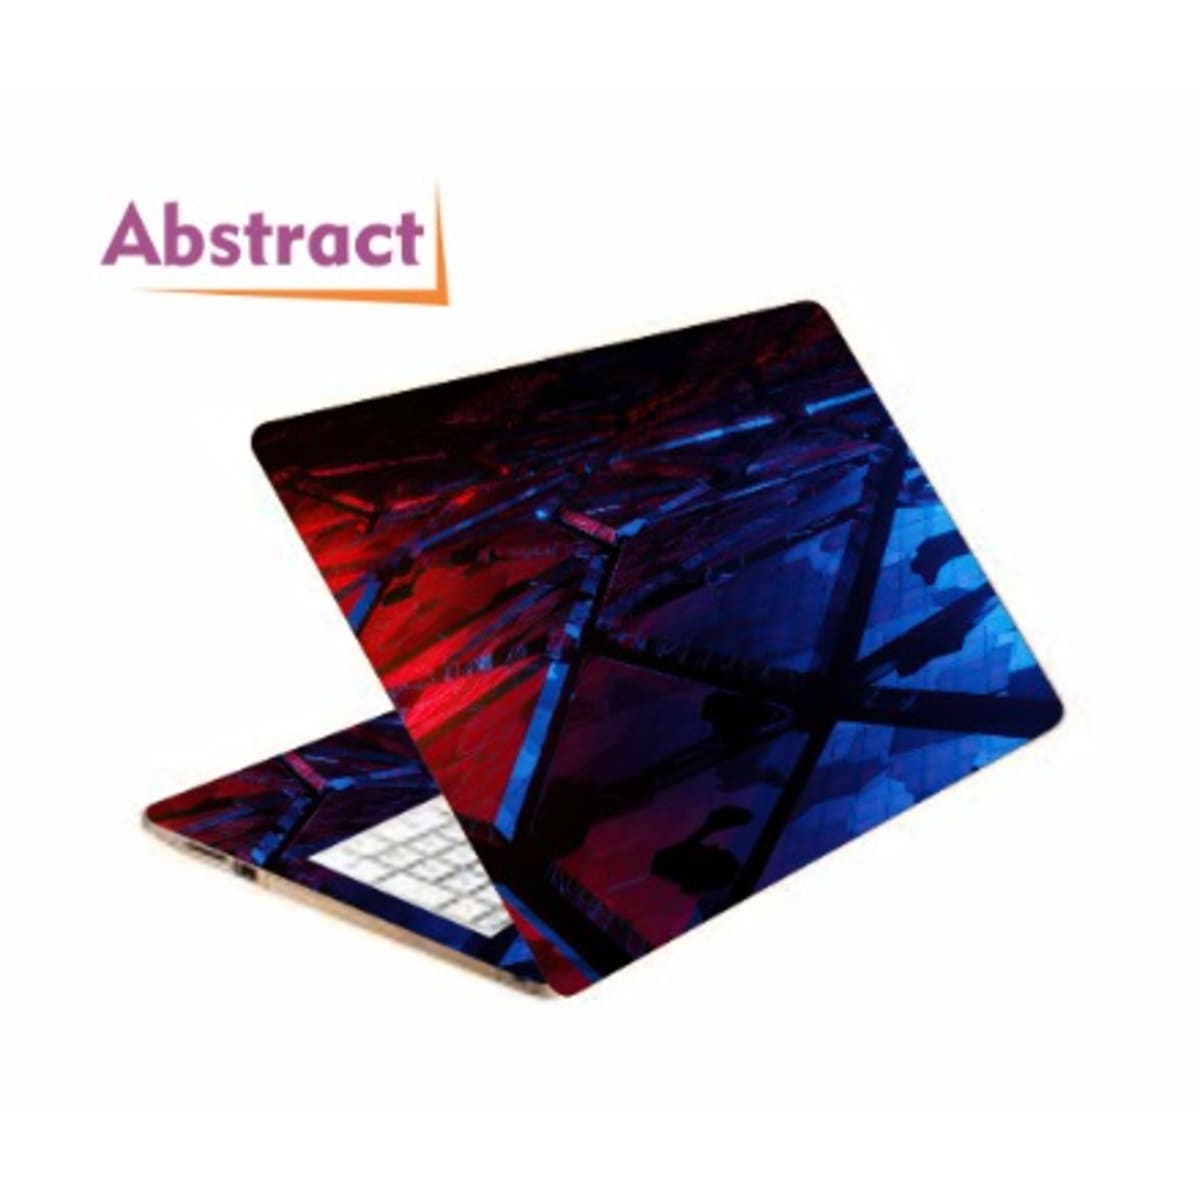 Laptop Abstract Skin 2